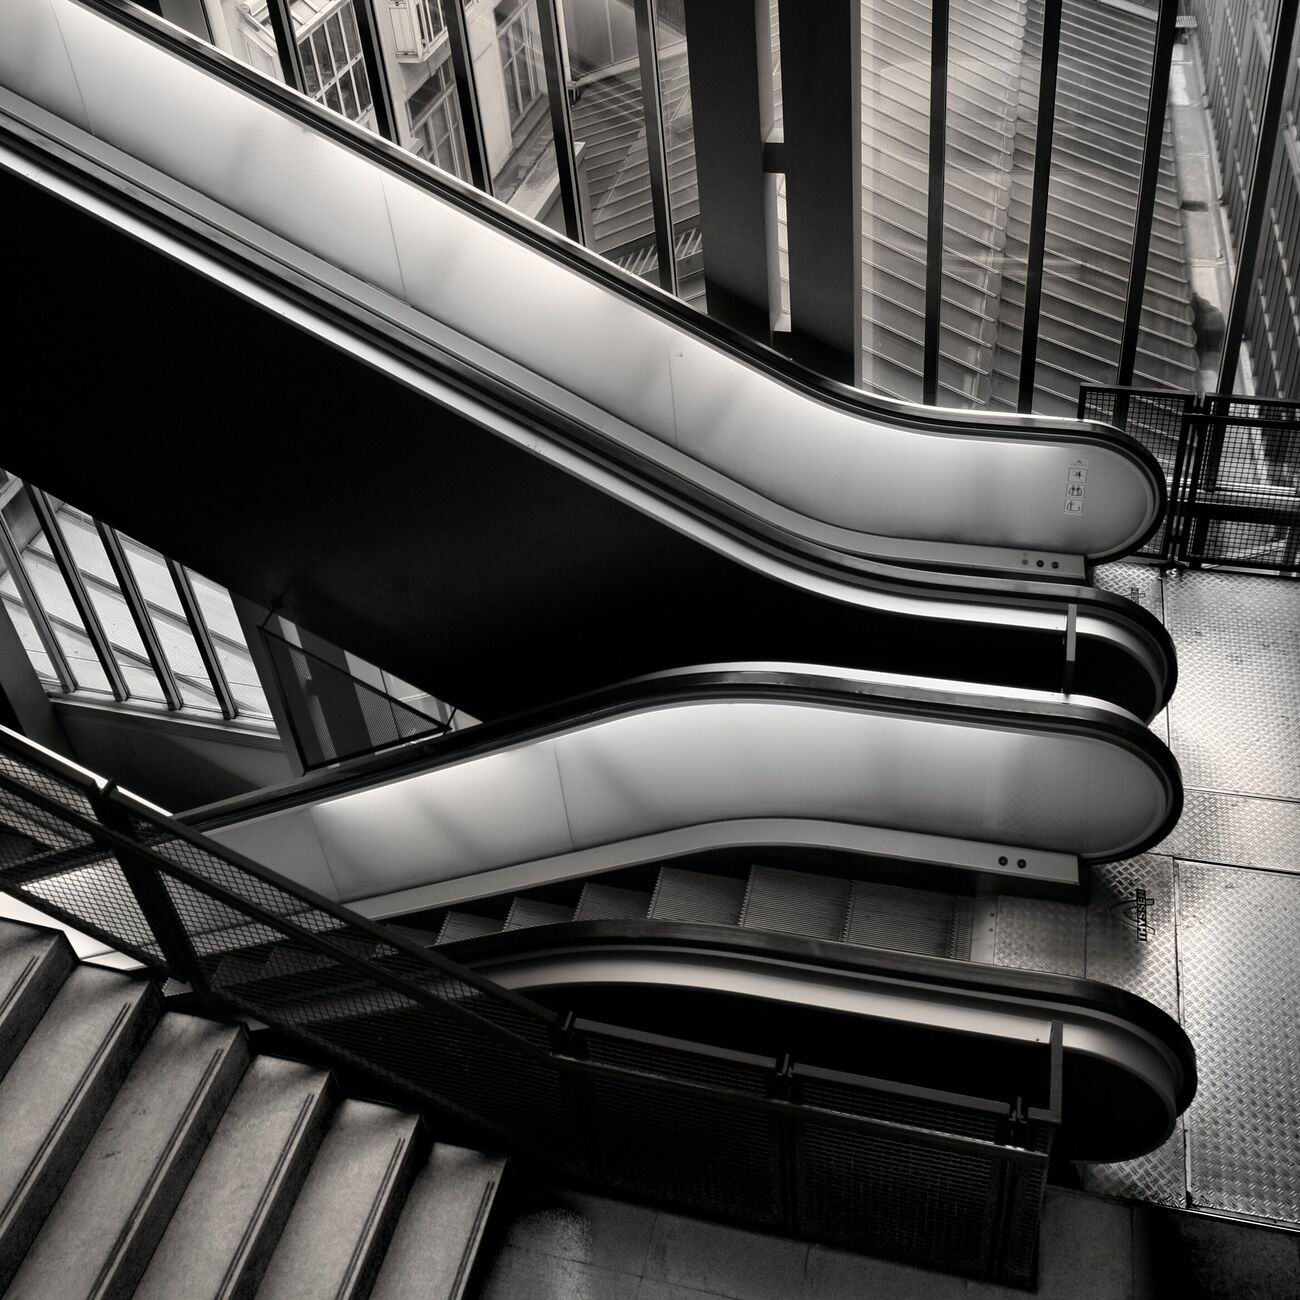 Get a 9.1 x 9.1 in, Orsay museum escalator. Ref-564-3 - Denis Olivier Art Photography